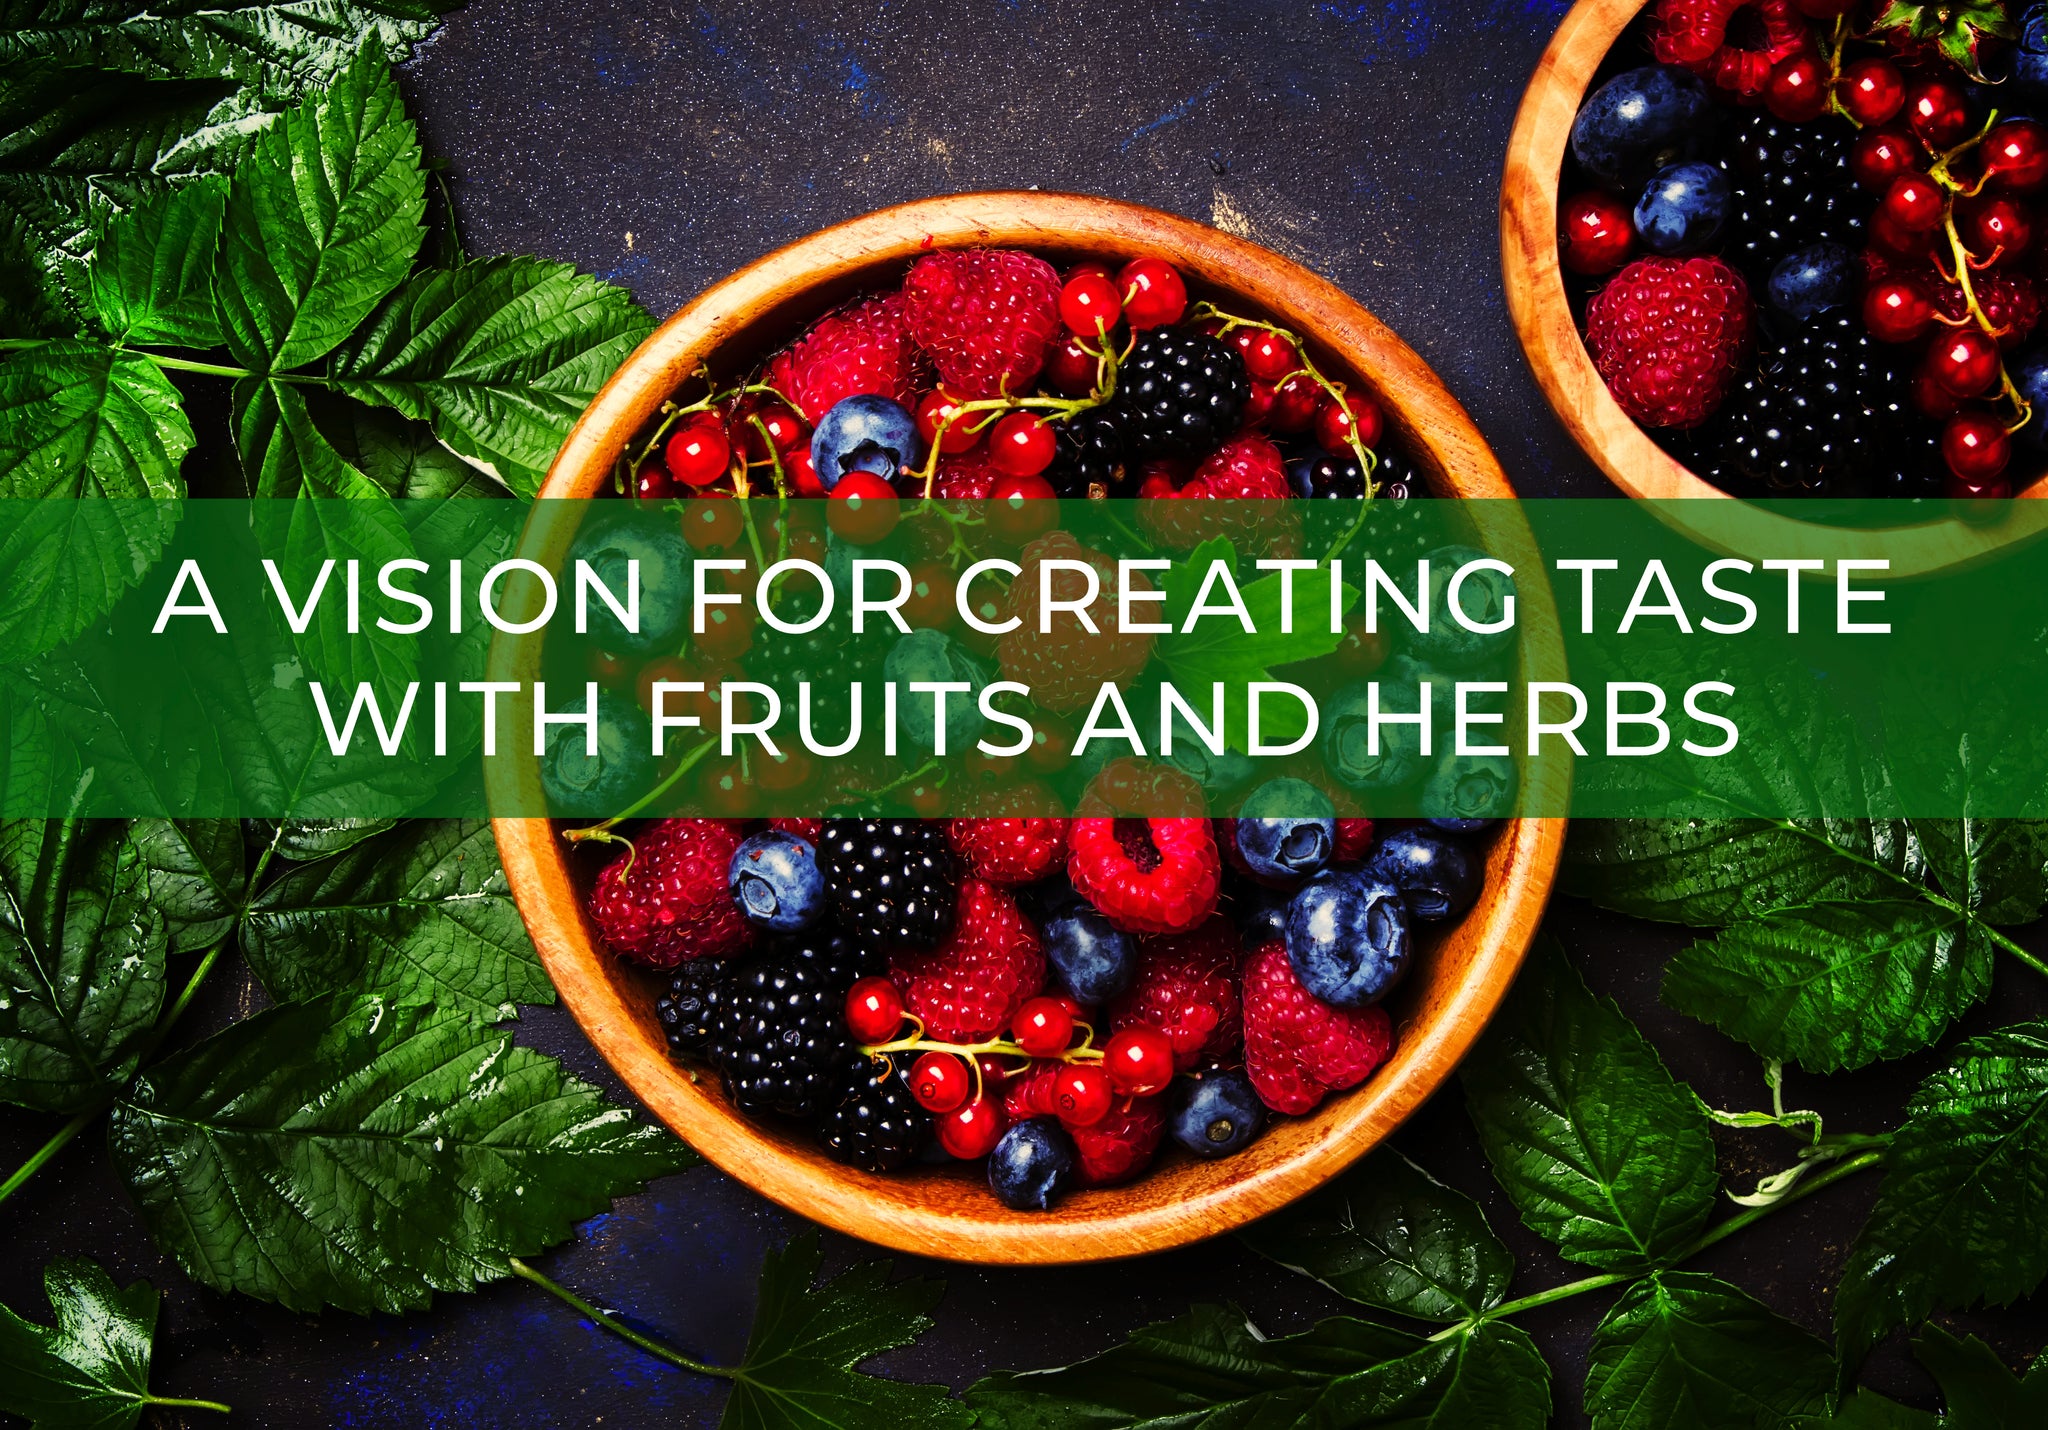 Image showing fruit berries with herbs. Text over image saying "A VISION FOR CREATING TASTE WITH FRUITS AND HERBS"